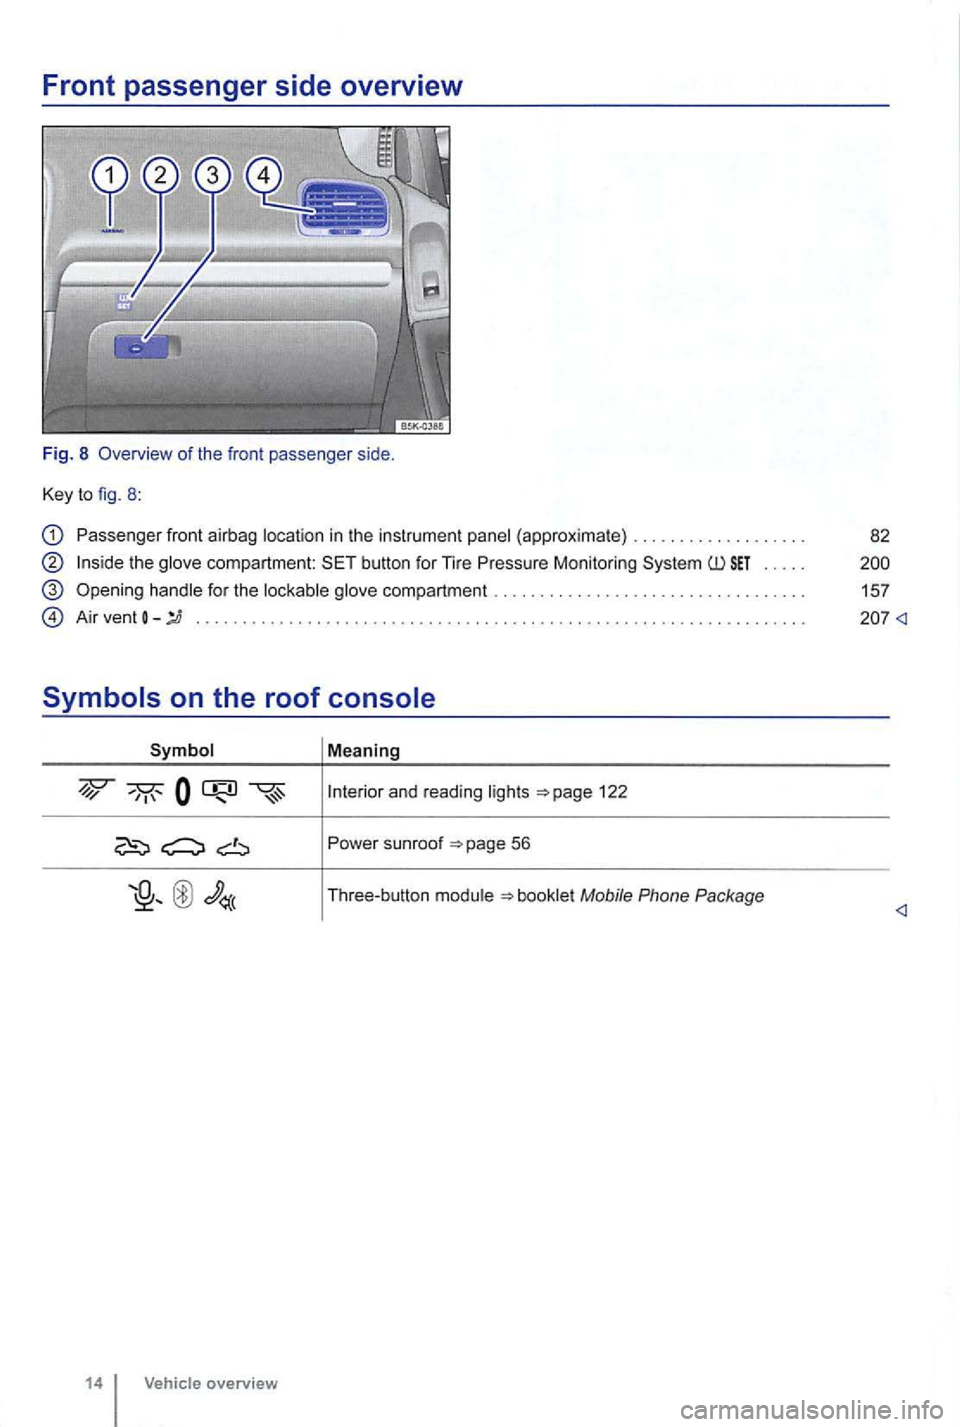 VOLKSWAGEN GOLF 2010  Owners Manual Front passenger  side overview 
Fig. 8 Overview of the  fron t passenger  side. 
Key  to fig. 8 : 
Passenger  front airbag  location  in the  instrument  panel (approxima te) .... .............. . 
th